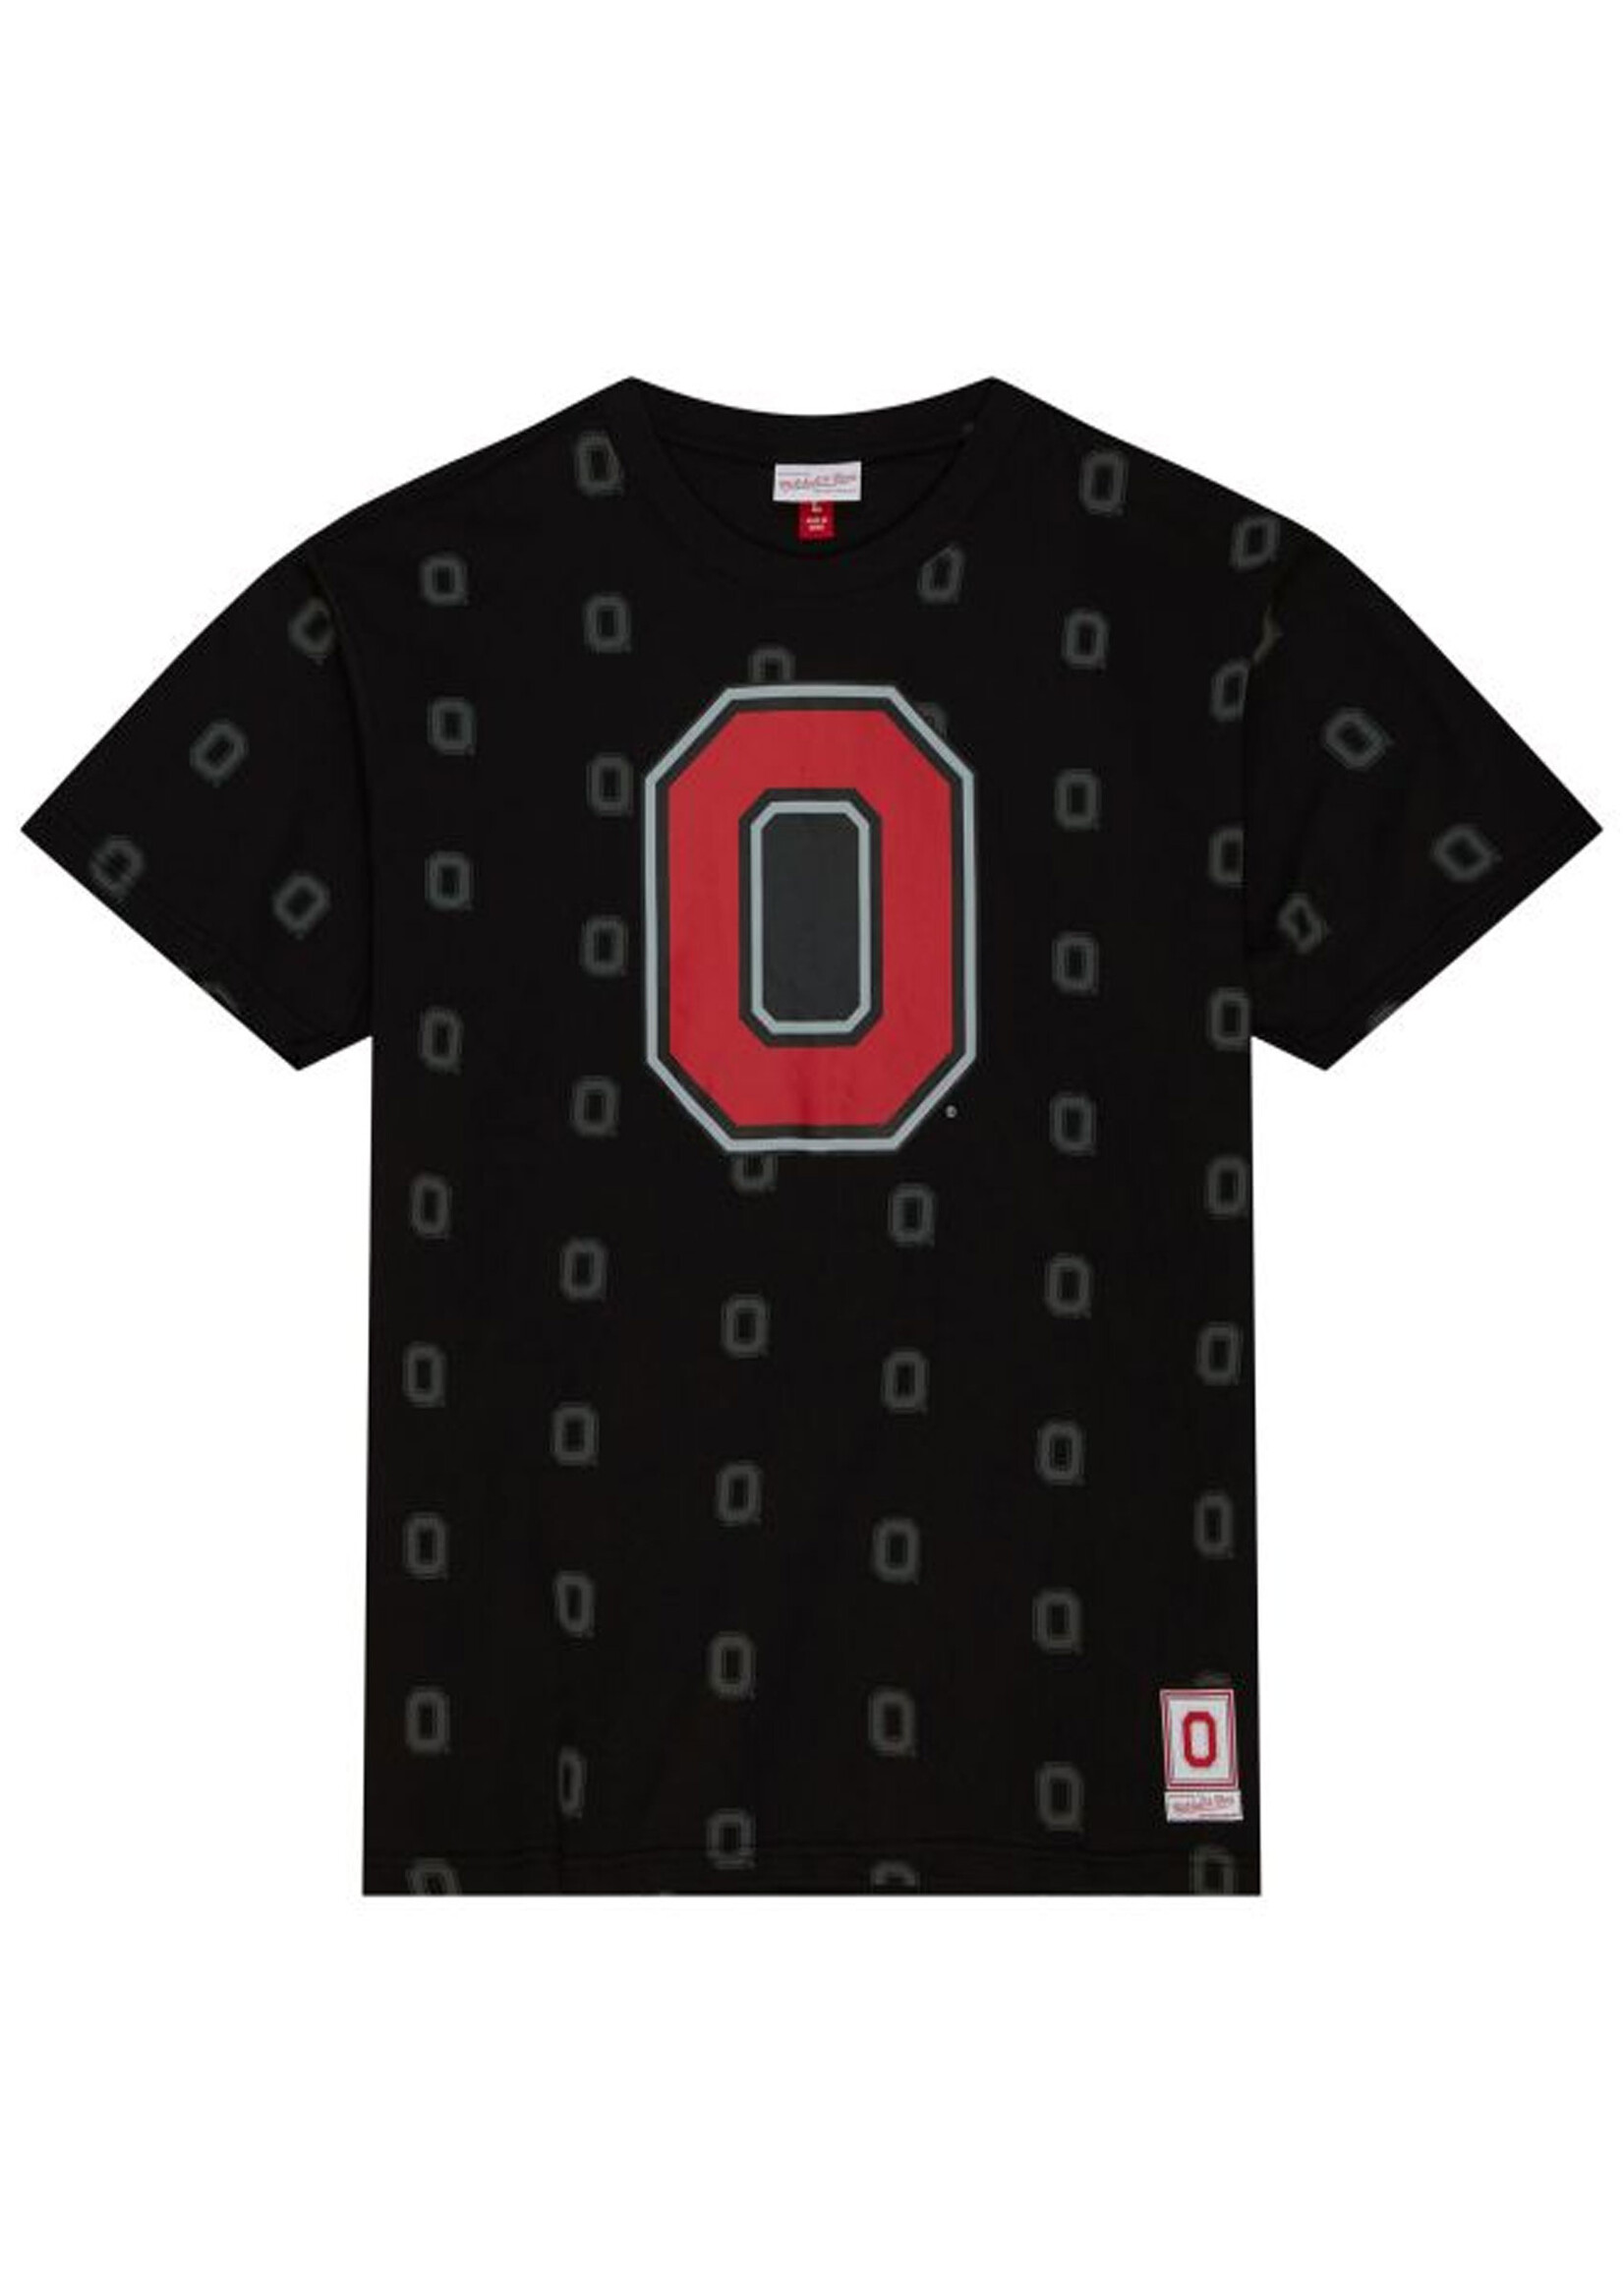 MITCHELL & NESS Ohio State Buckeyes Mitchell & Ness Repeating Athletic O Tee